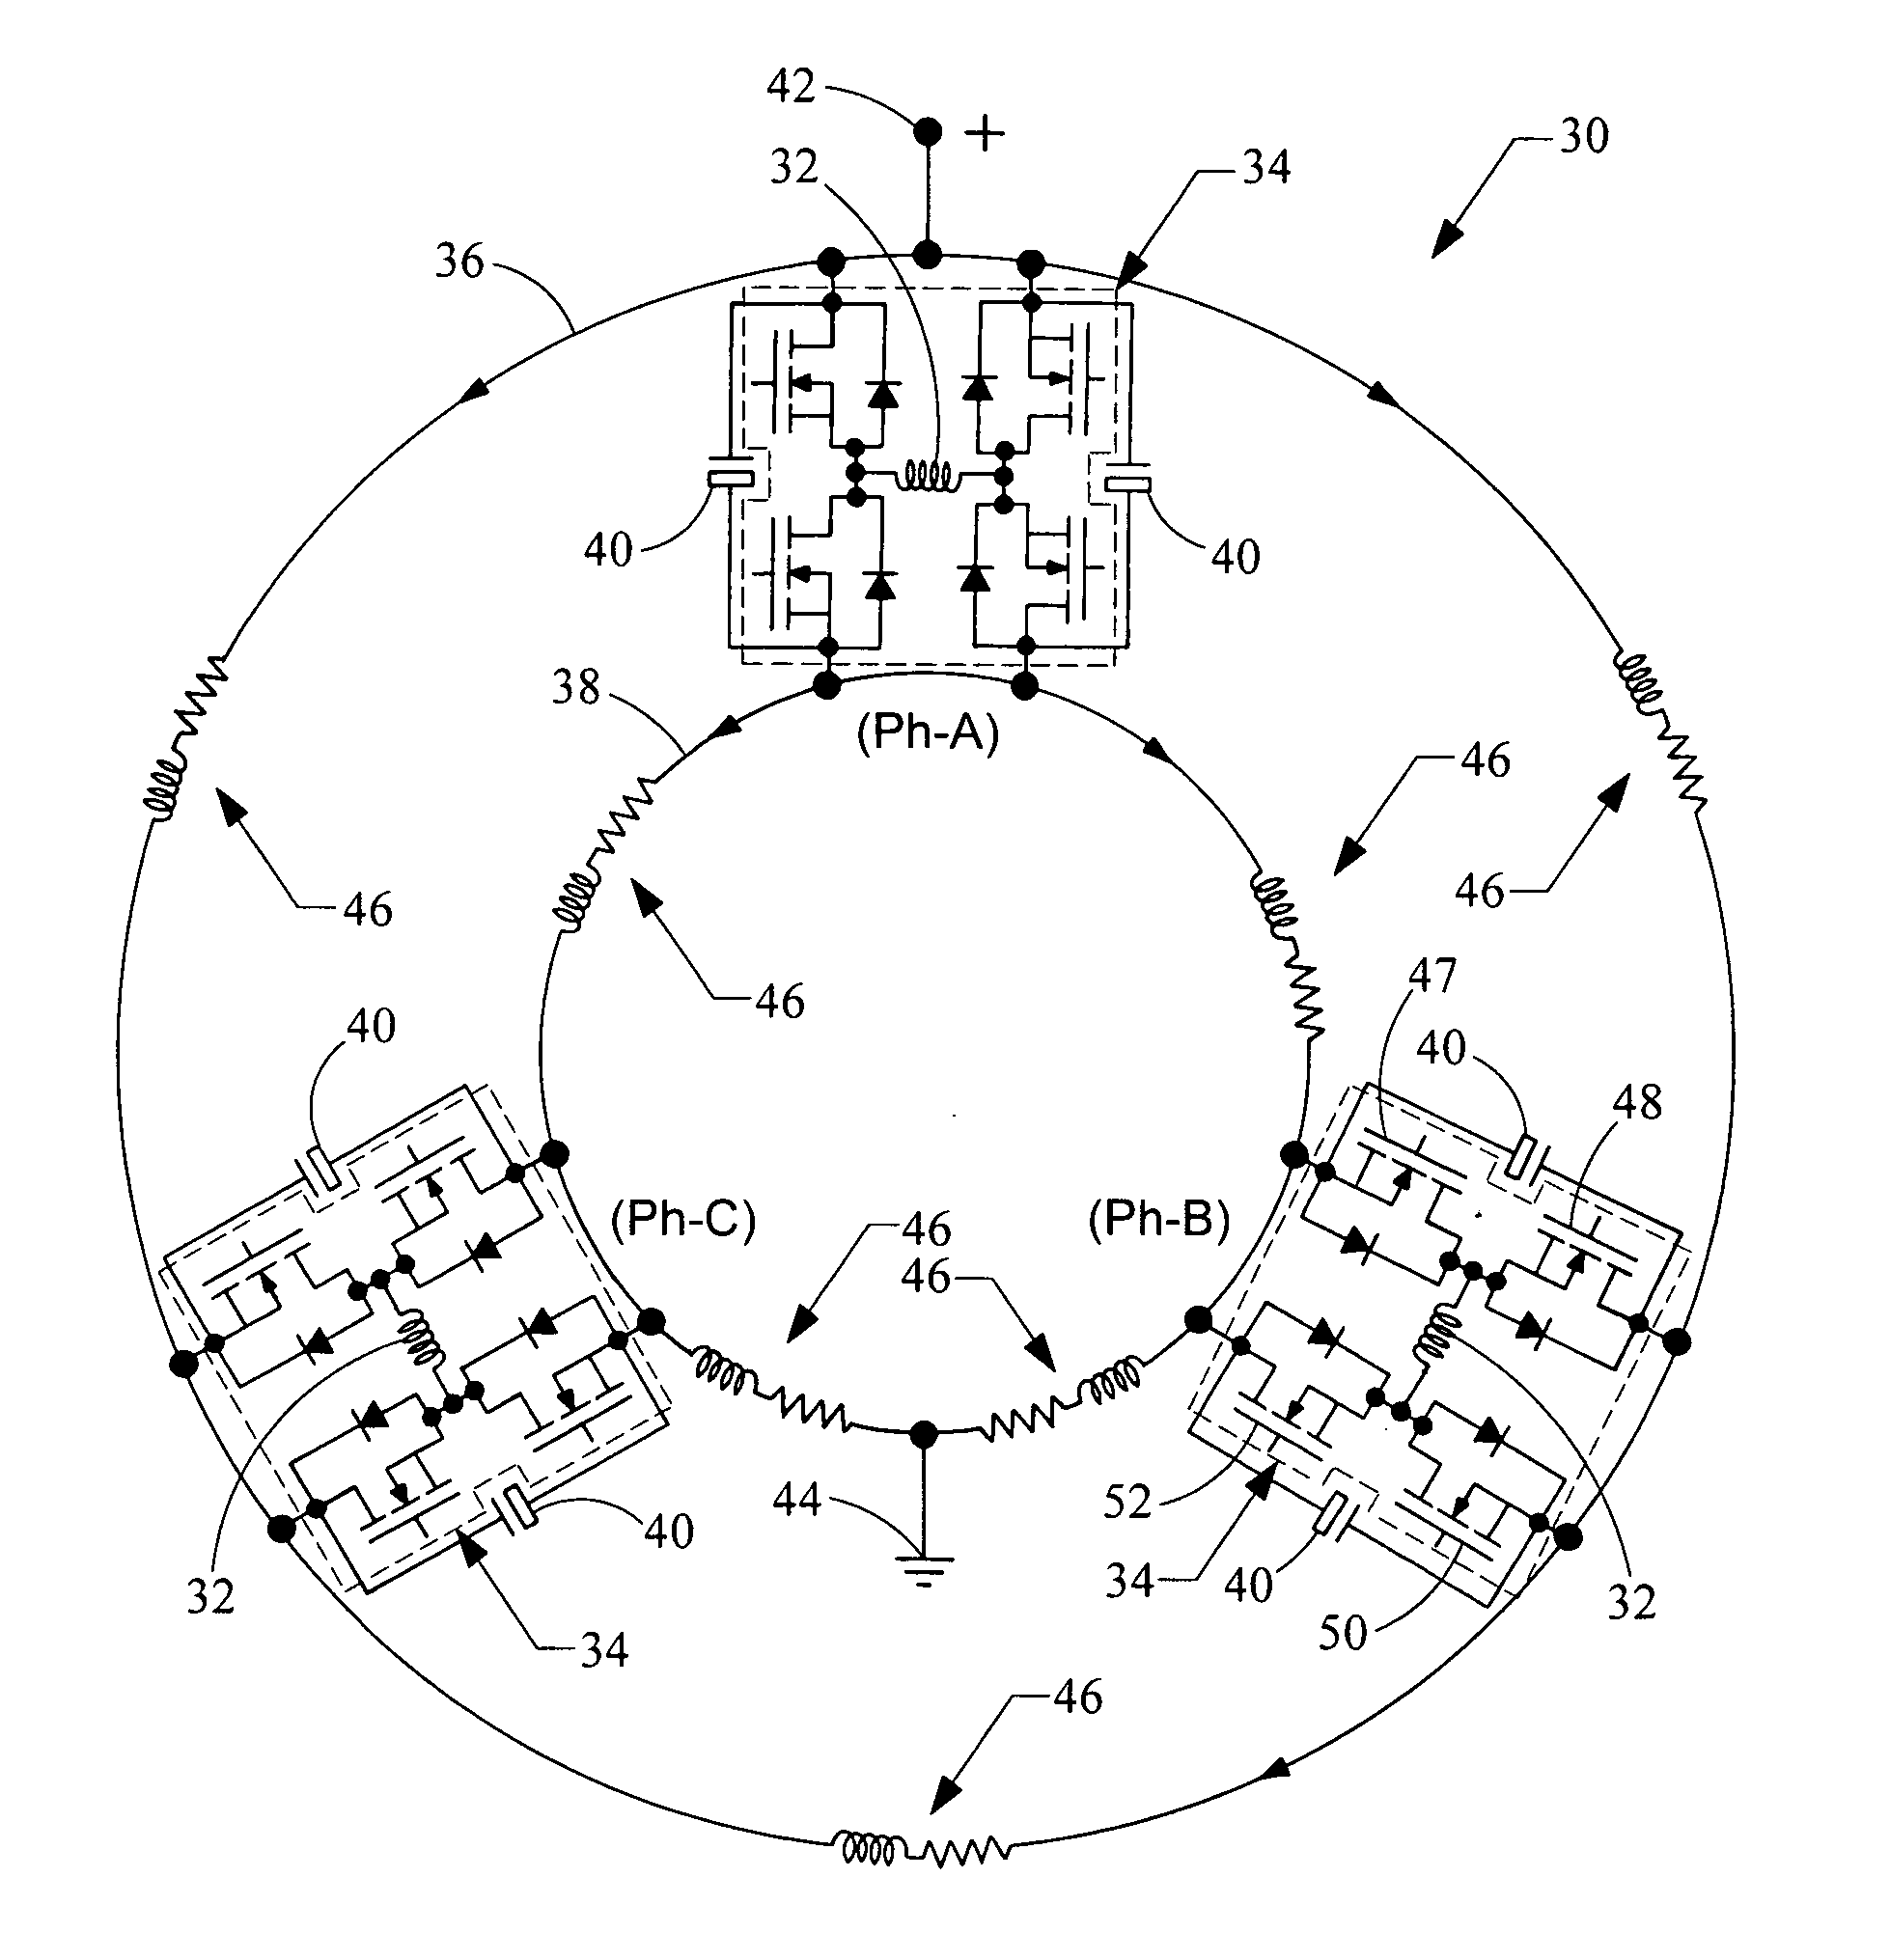 Electric machine with integrated electronics in a circular/closed-loop arrangement